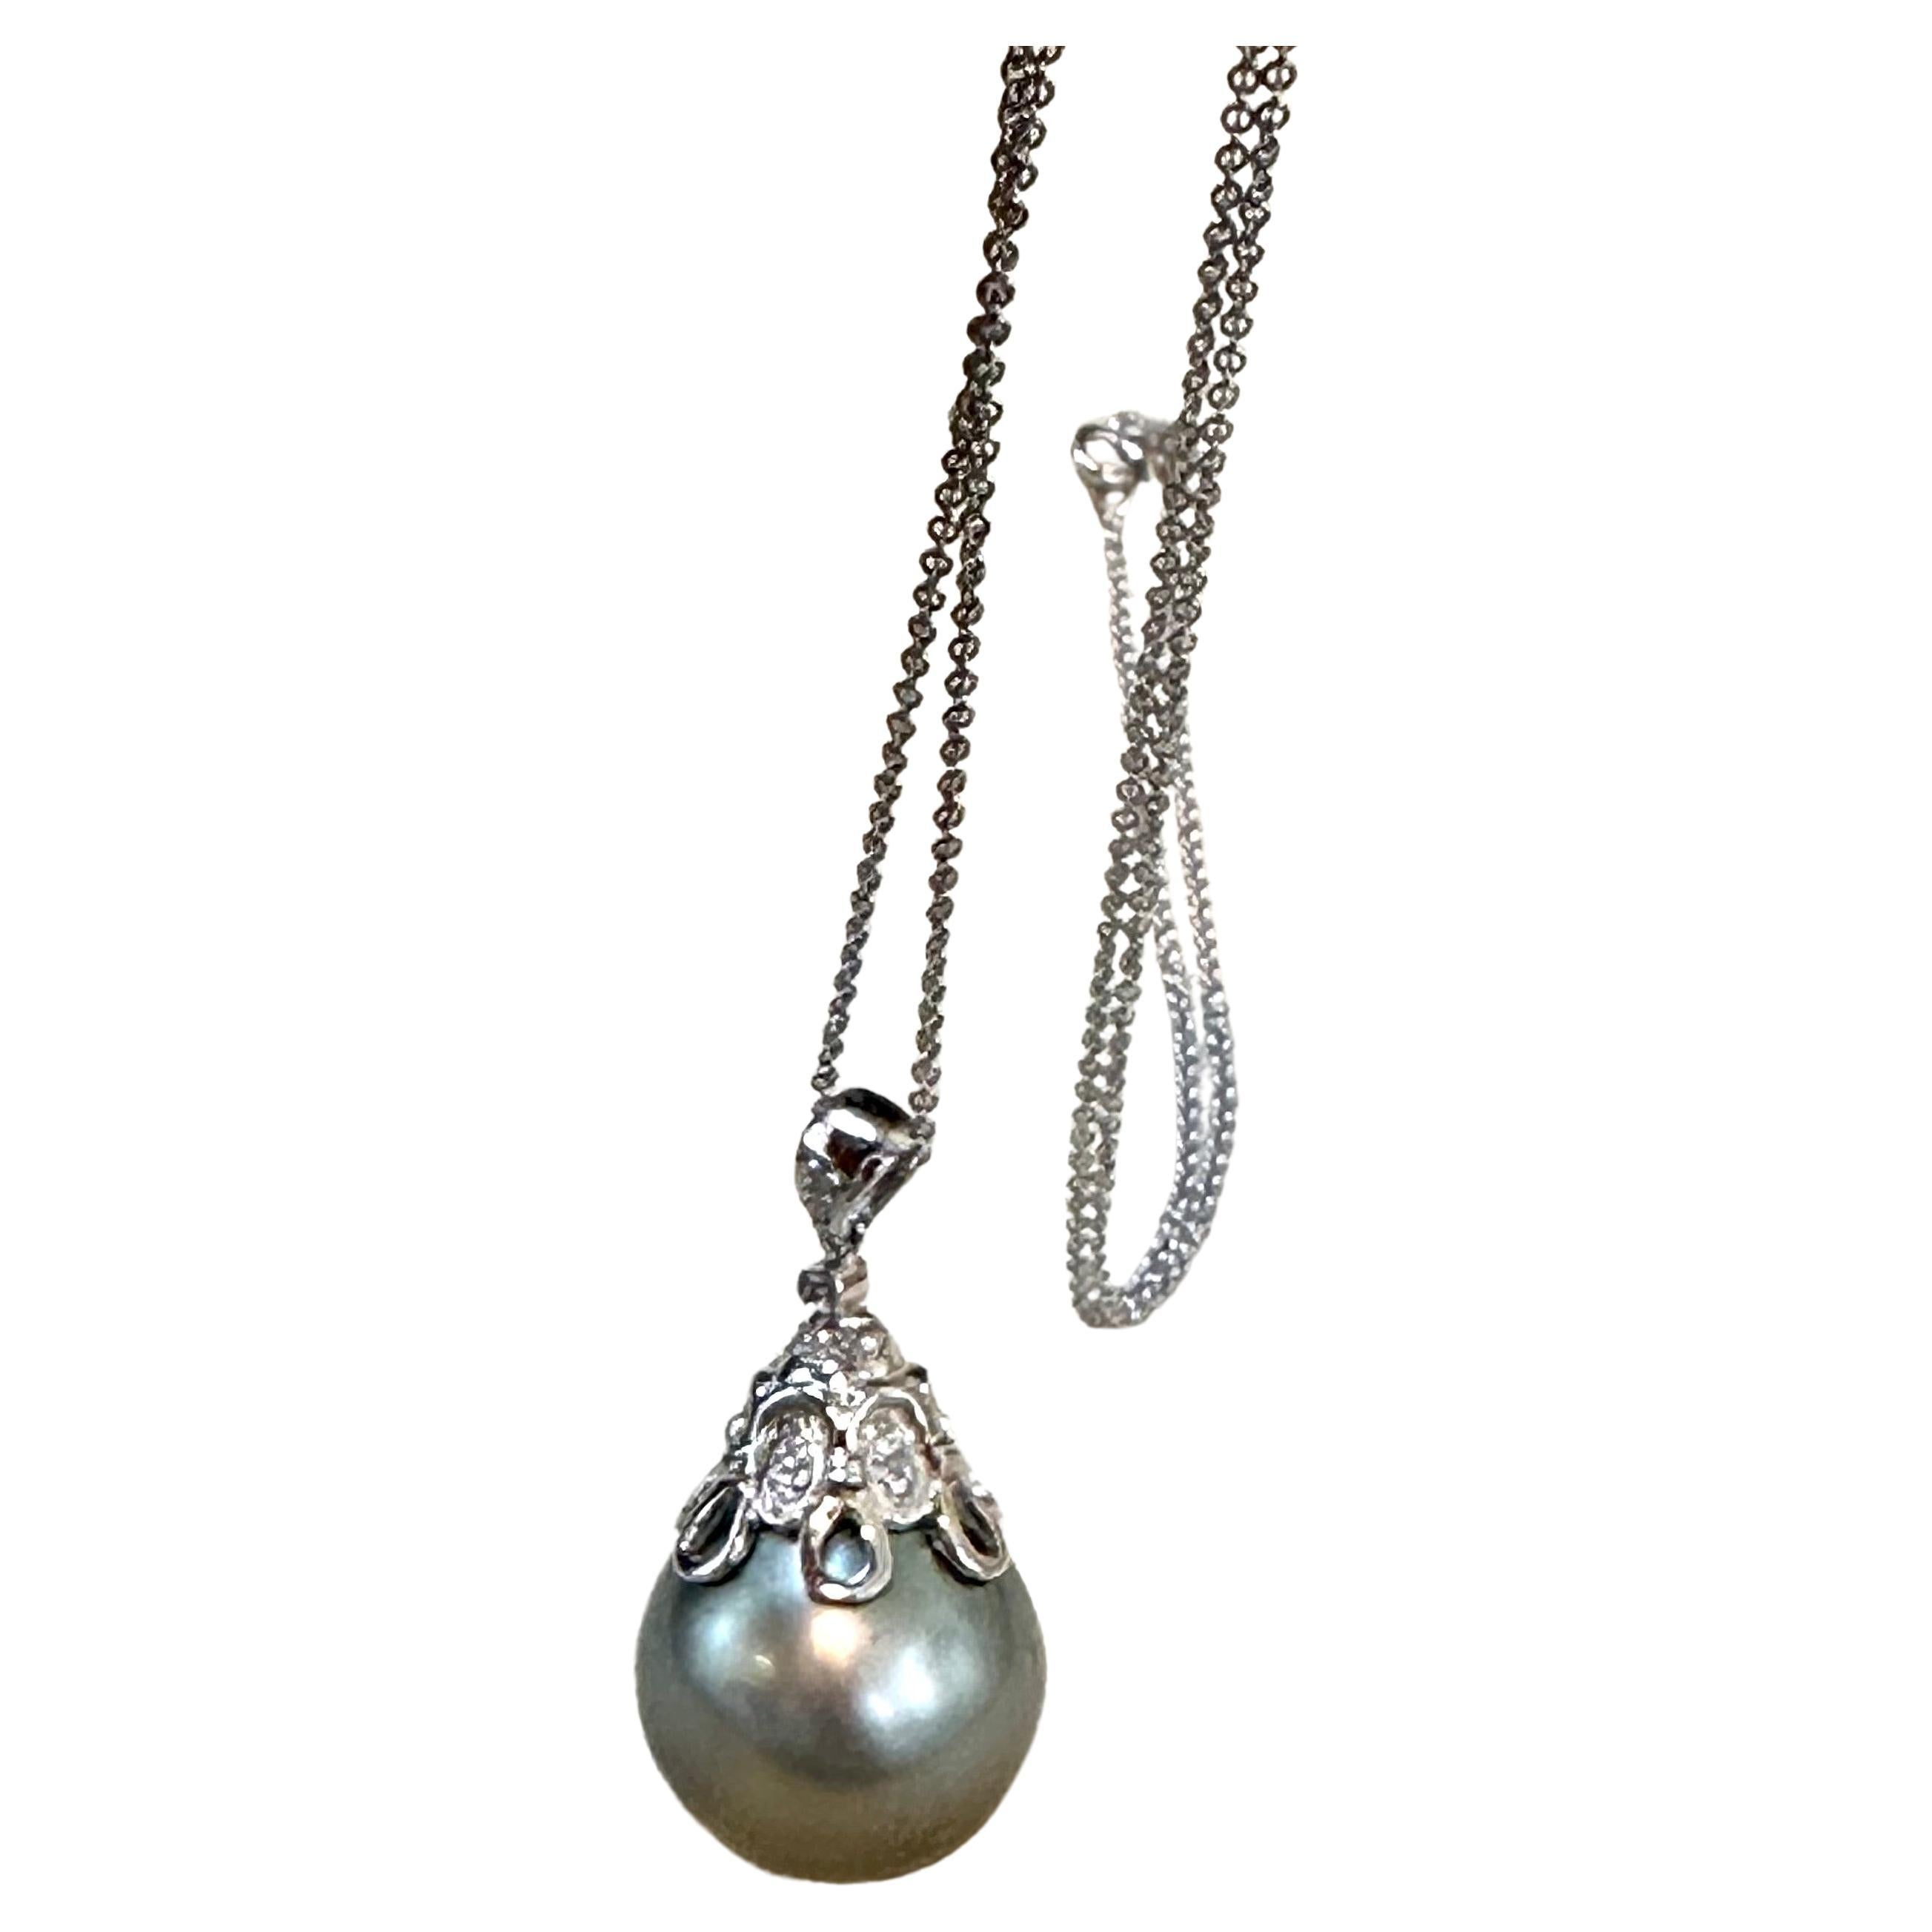 Introducing the exquisite 15.5mm Black Tahitian Pearl & Diamond Pendant in 18K Gold, accompanied by a 14K Gold Chain. This pendant exudes timeless elegance and sophistication.

The centerpiece of this pendant is a stunning 15.5mm Black Tahitian